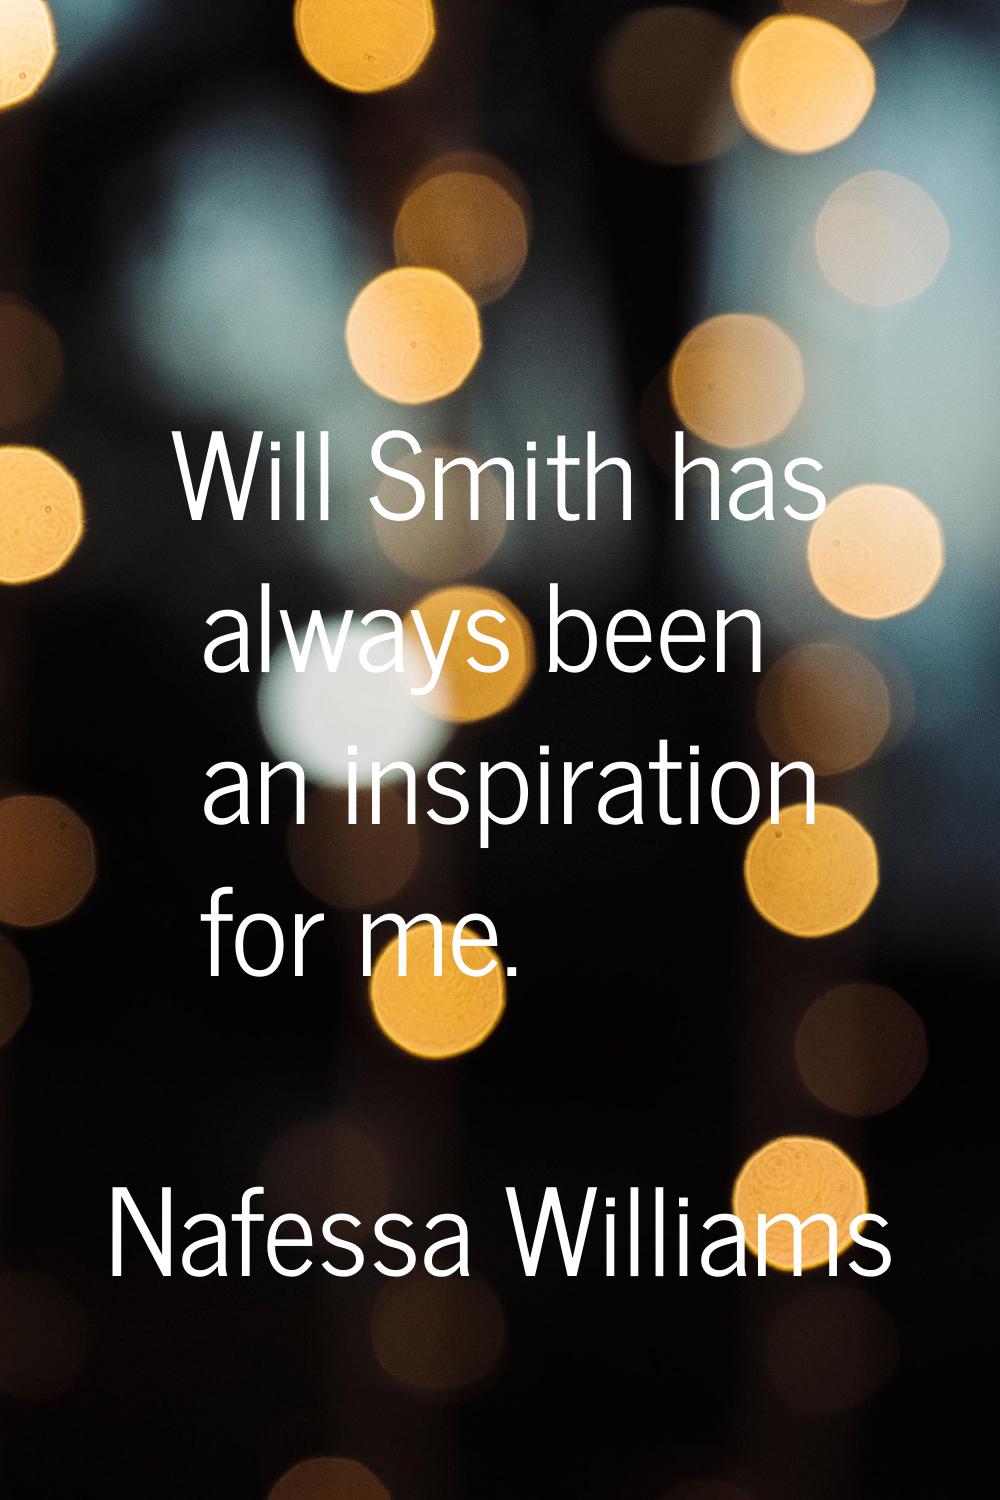 Will Smith has always been an inspiration for me.